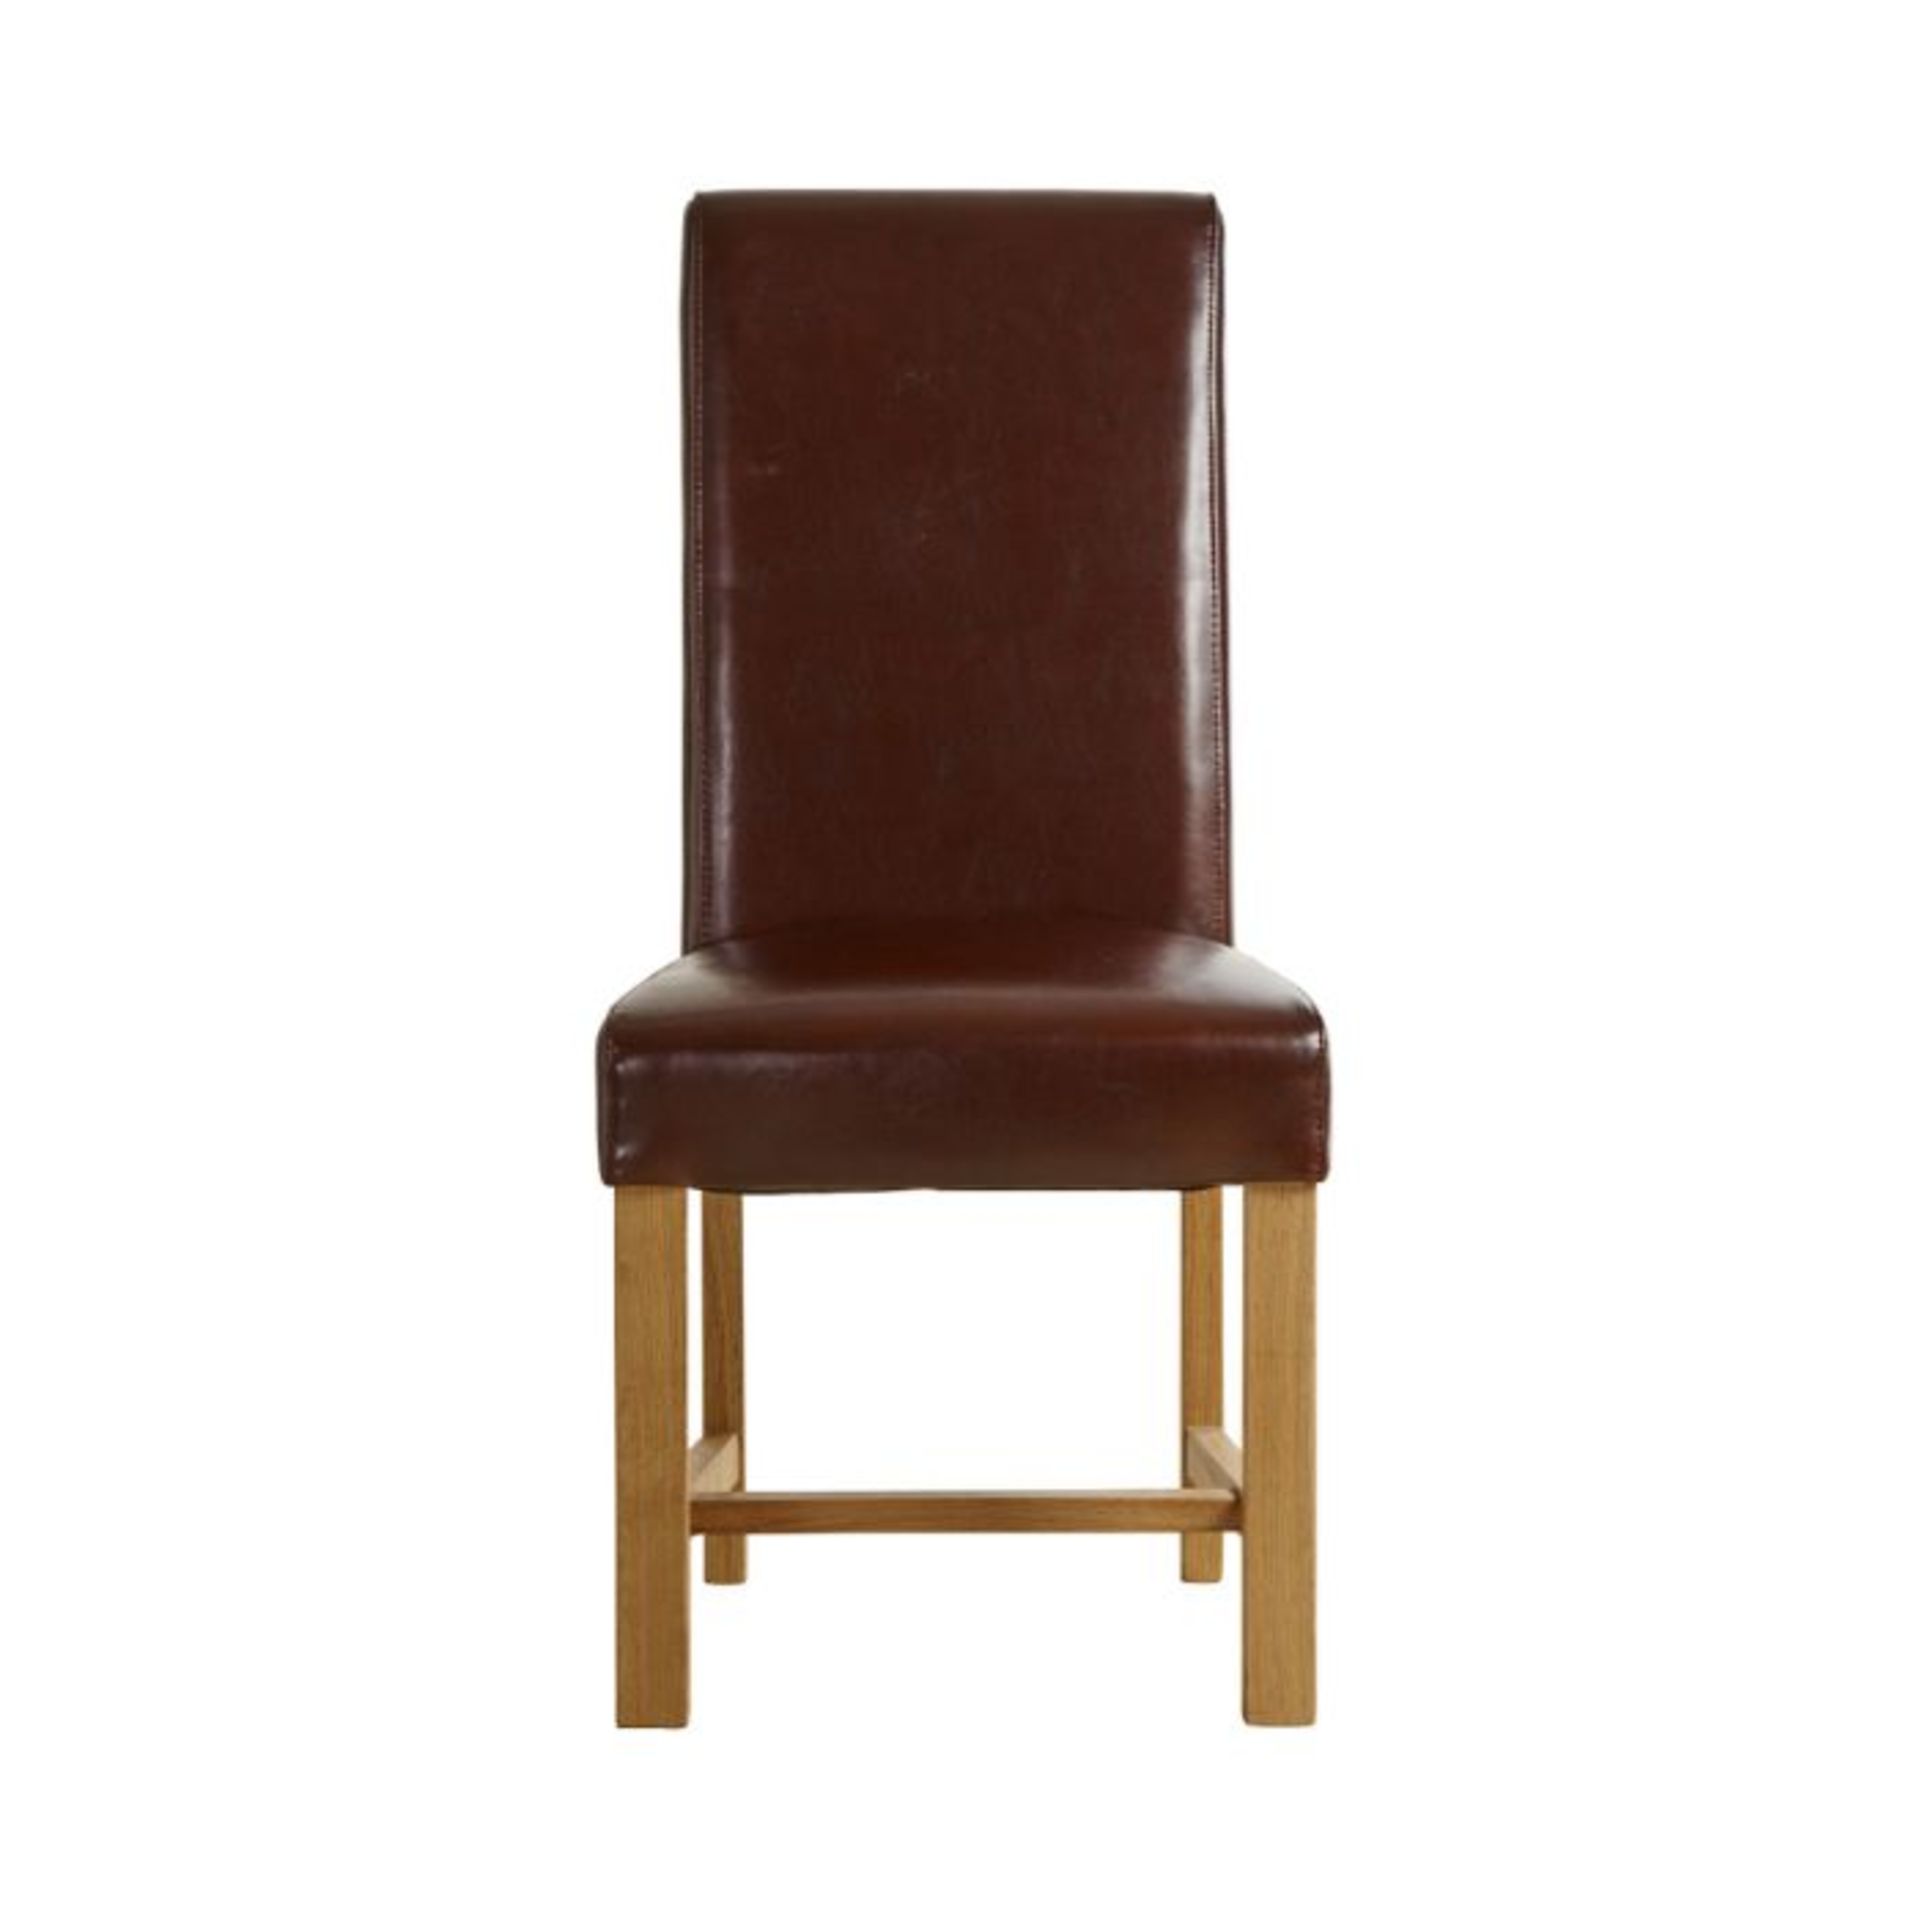 Oak Furnitureland Pair of Braced Scroll Back Chair in Brown Bicast Leather with Solid Oak Legs - Image 2 of 4